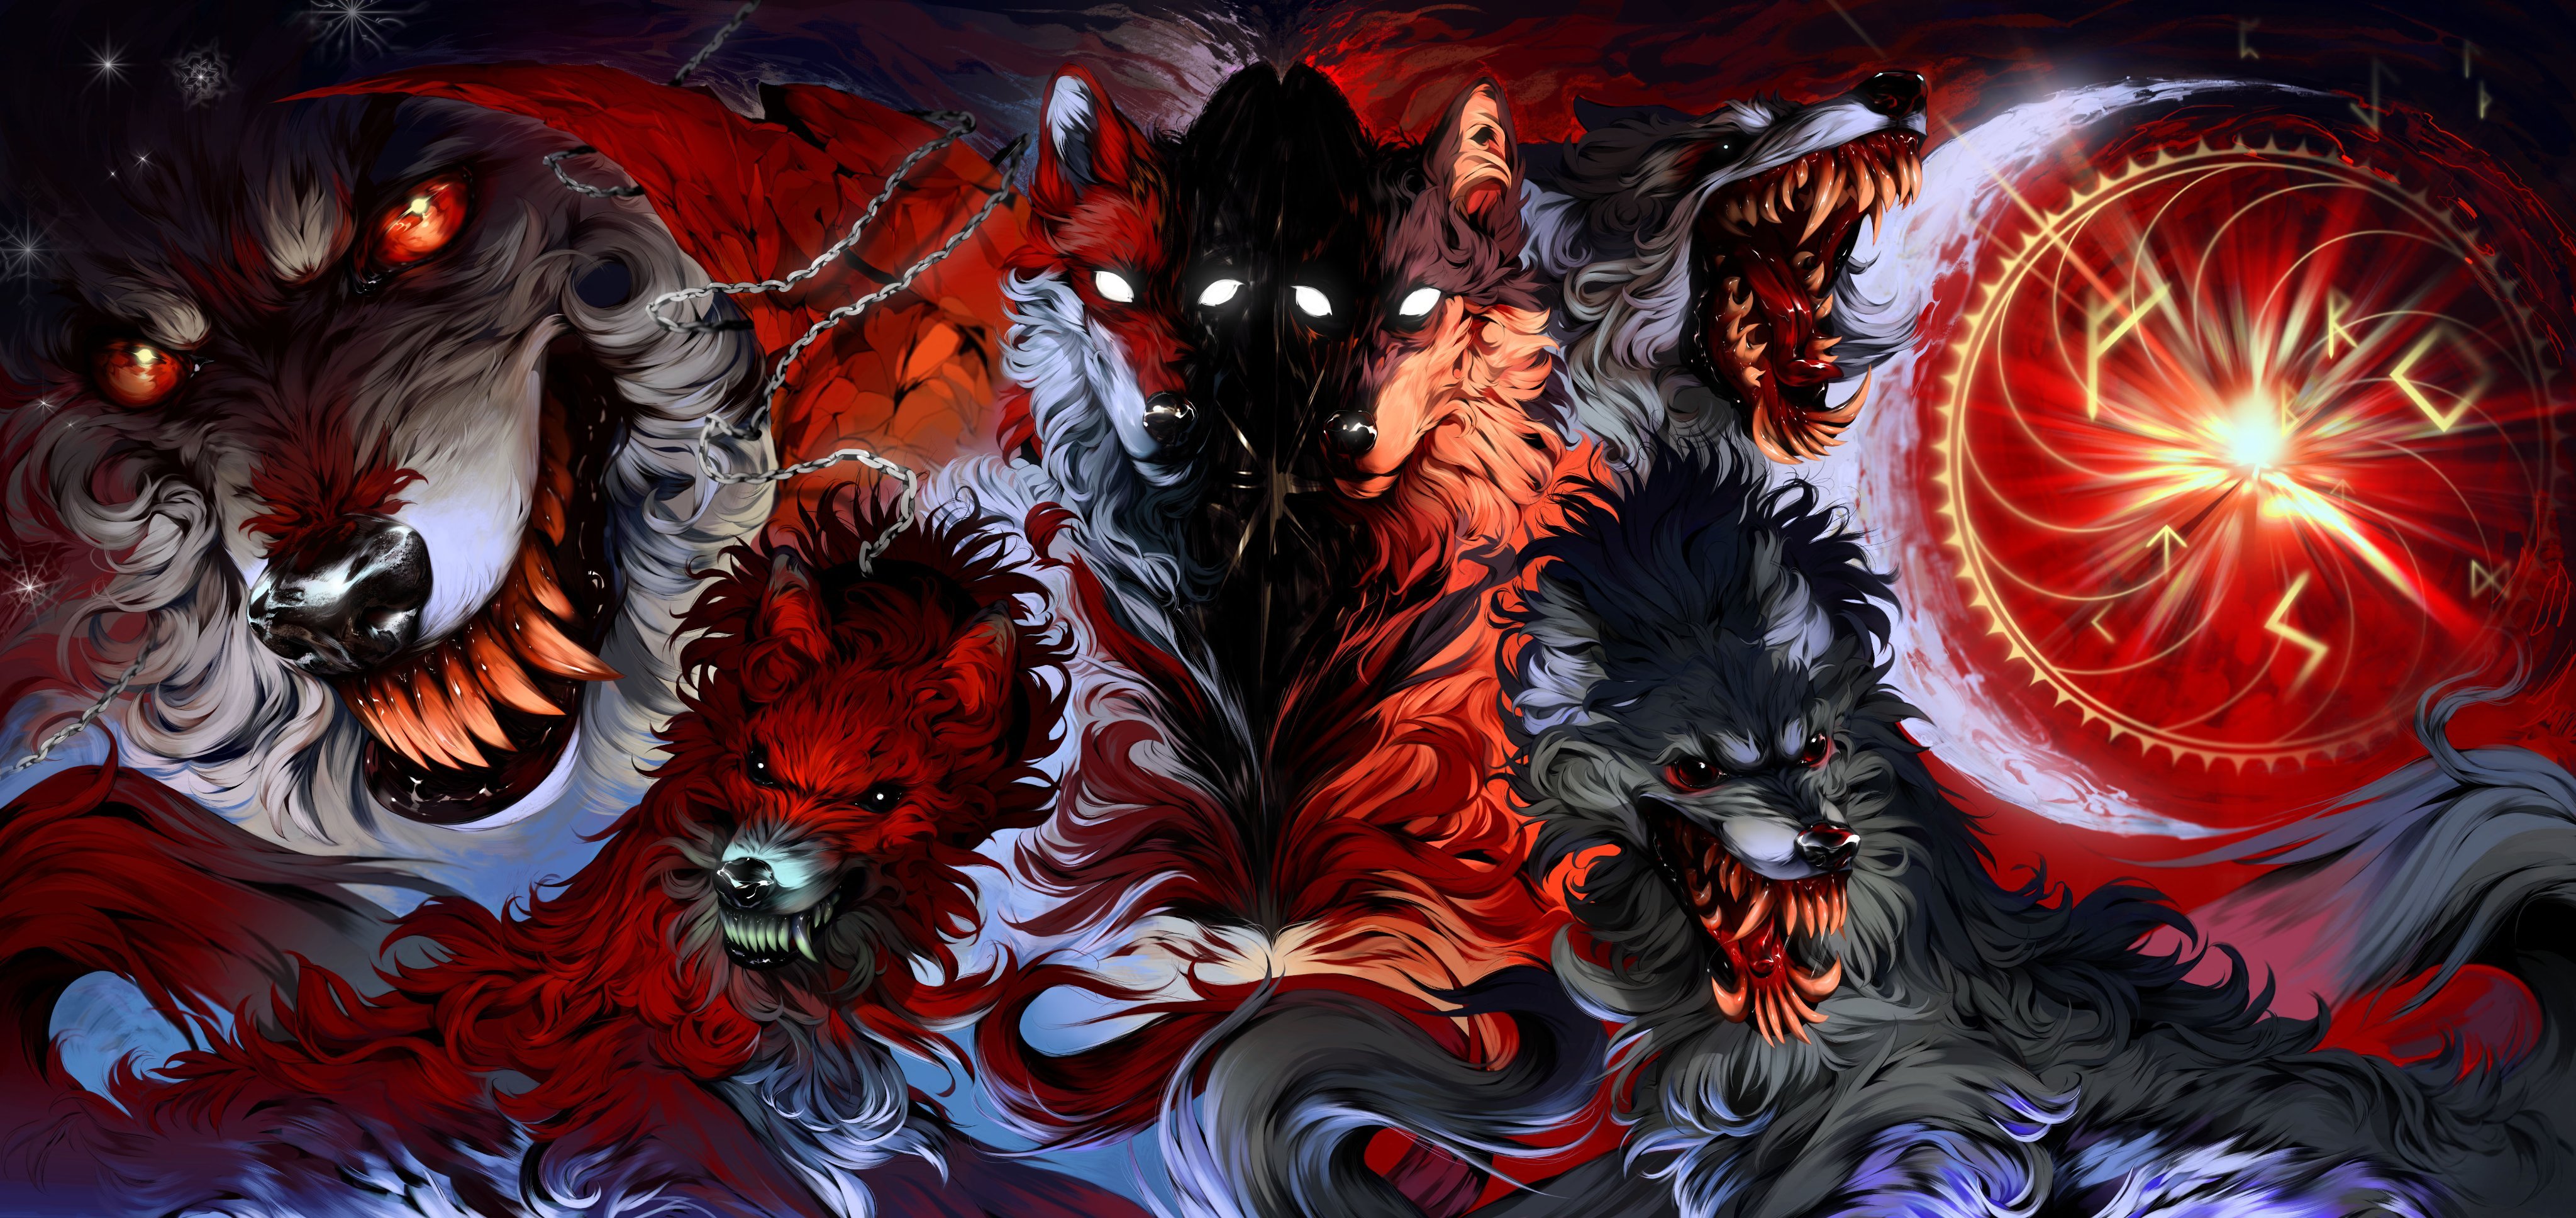 Skoll And Hati Wallpapers - Wallpaper Cave